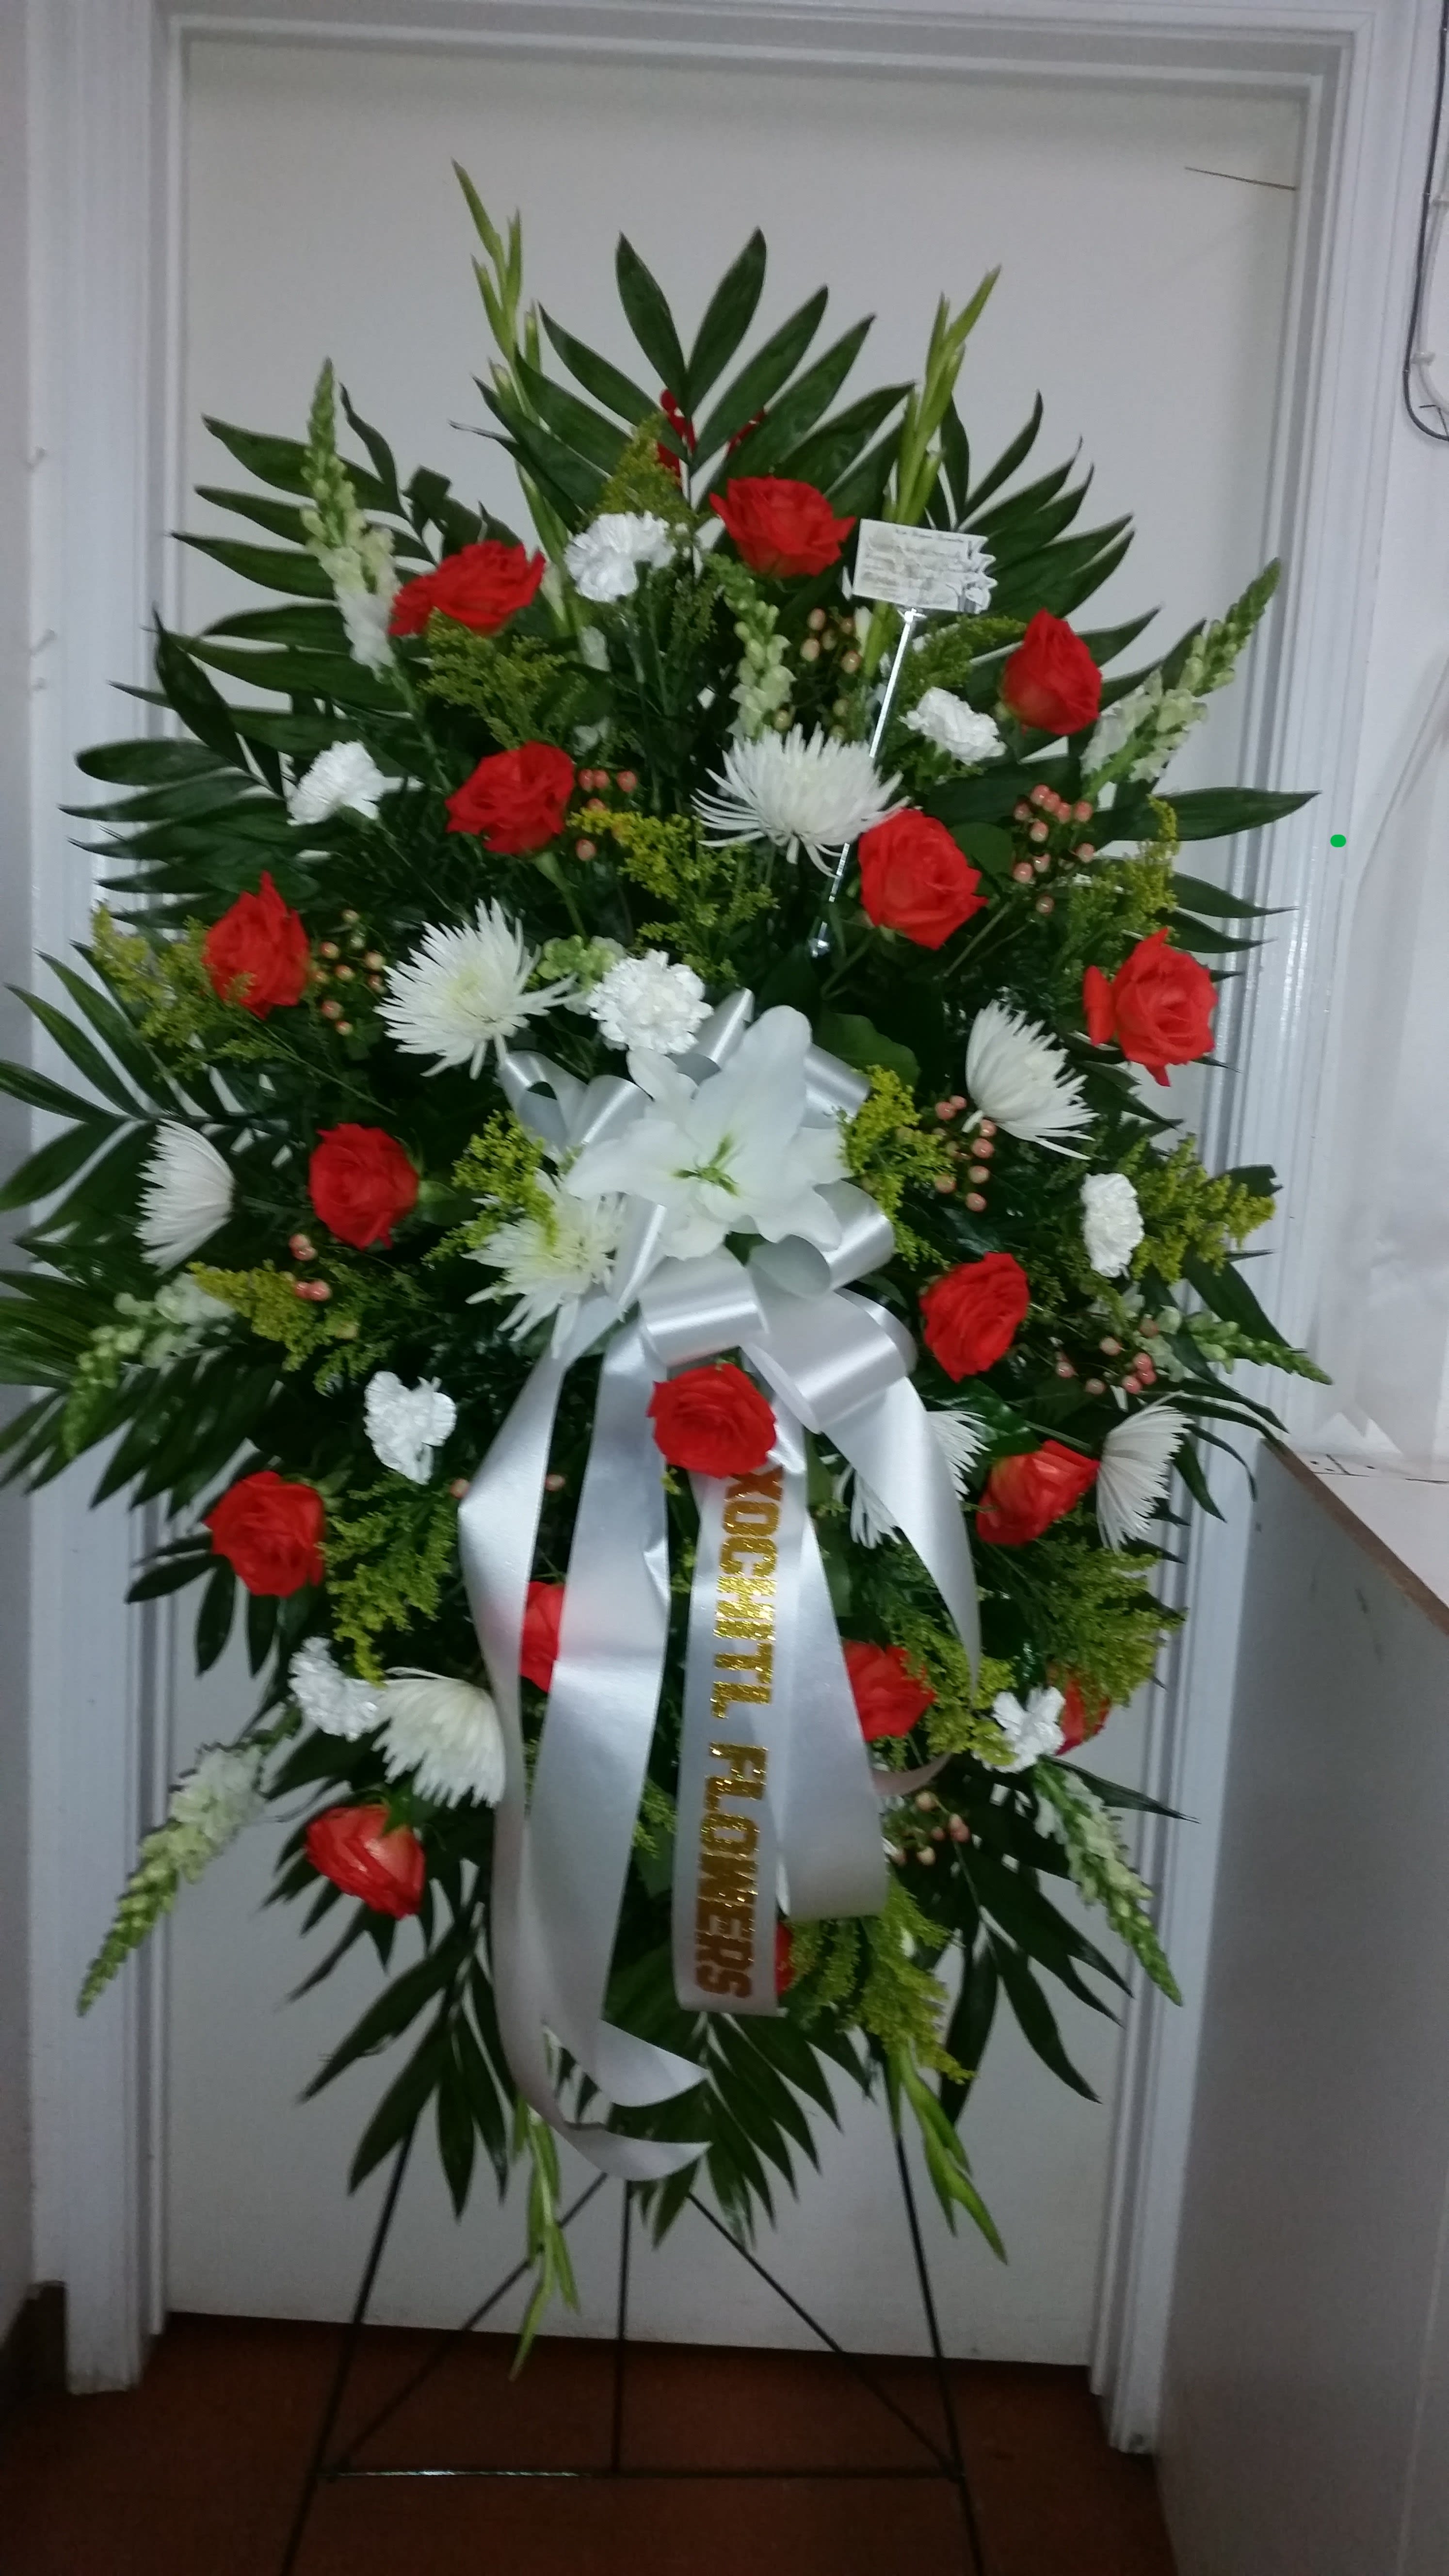 STANDING SPRAY WITH MIXED COLOR FLOWERS INCLUDING ROSES - RED AND WHITE STANDING PRAY WITH MIXED FLOWERS, INCLUDING ROSES.